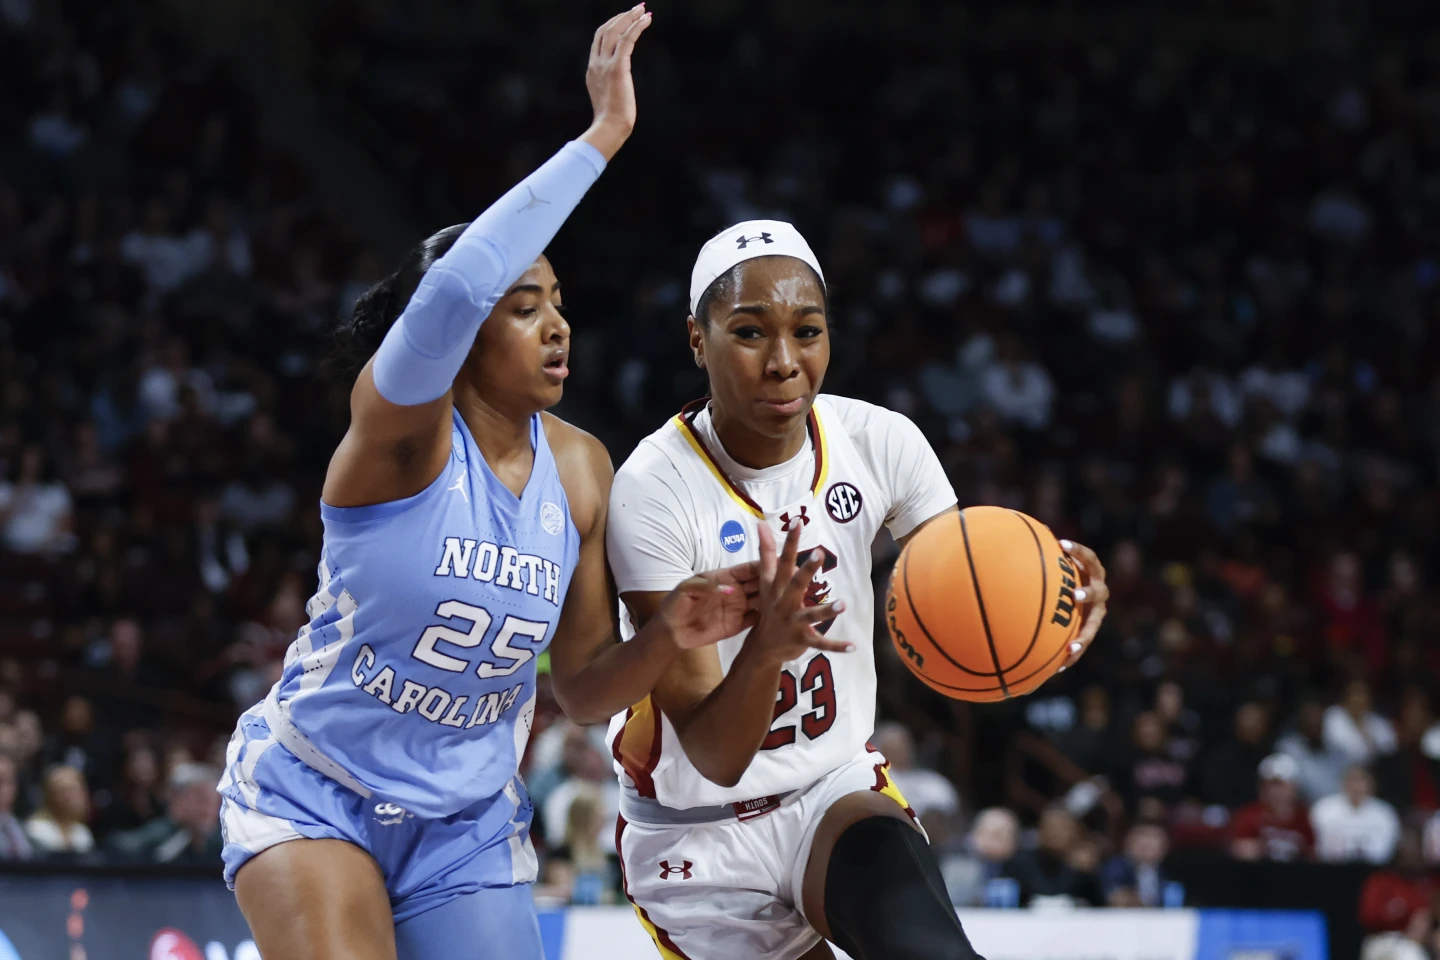 UNC Women's Basketball's NCAA Tournament Ends With Second-Round Loss To No. 1 South Carolina